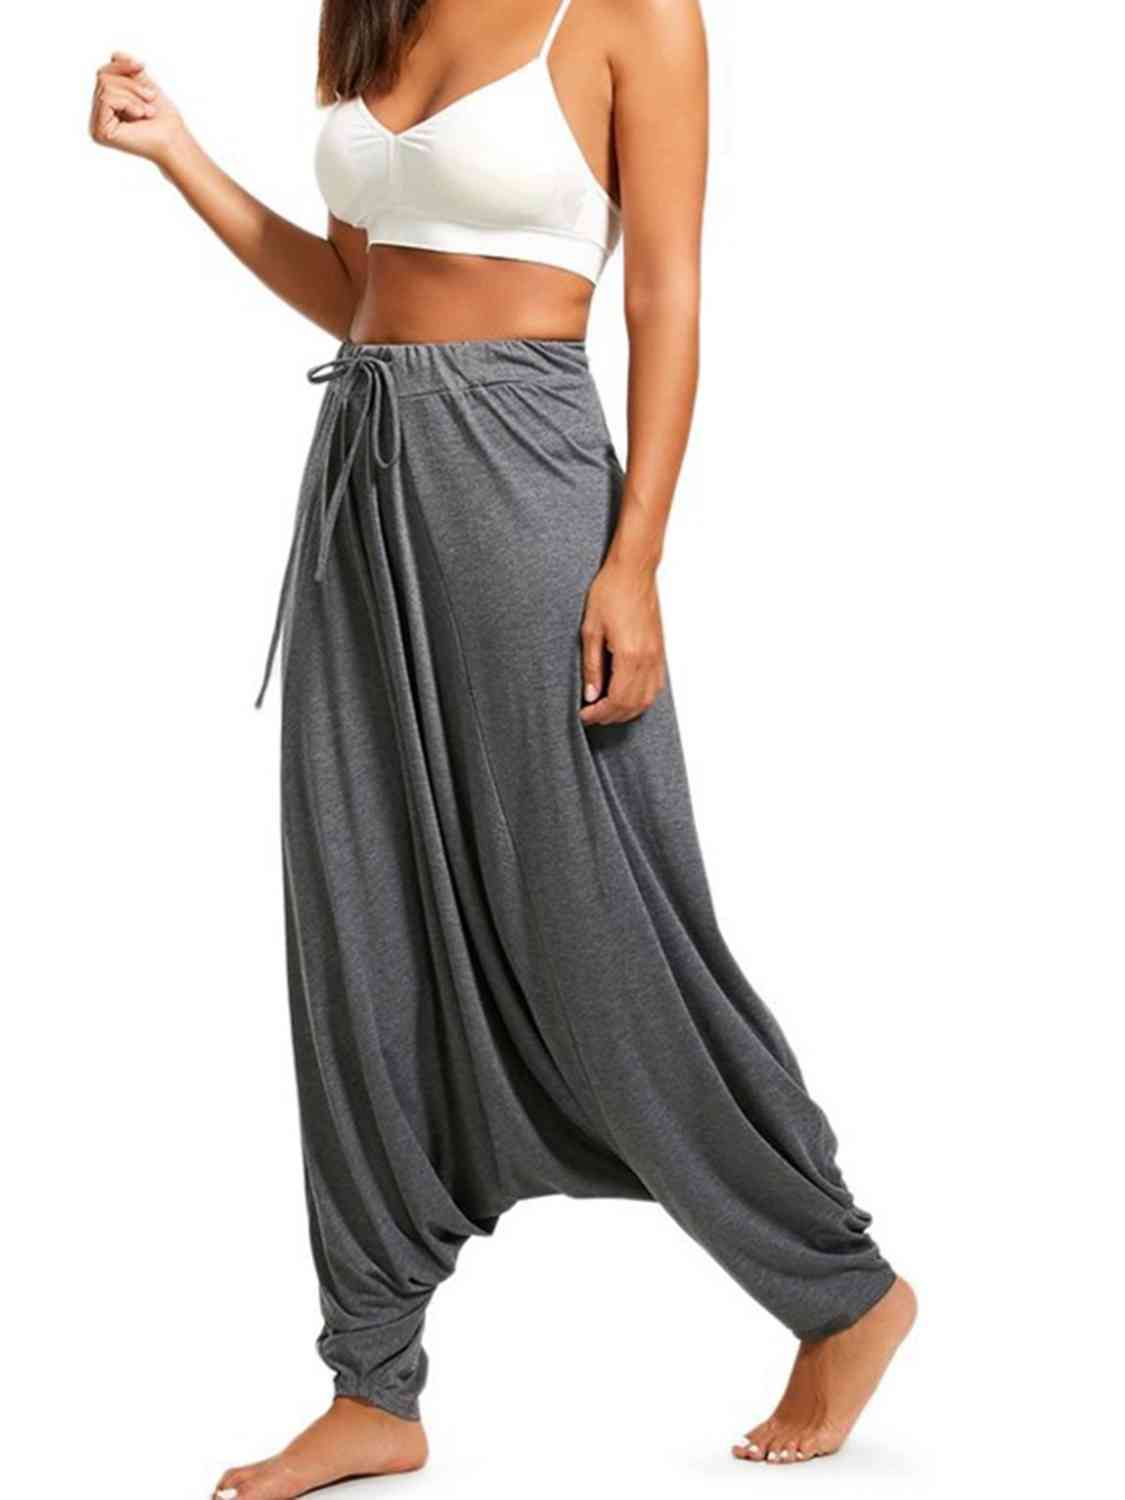 Tied Mid Waist Long Harem Pants Print on any thing USA/STOD clothes